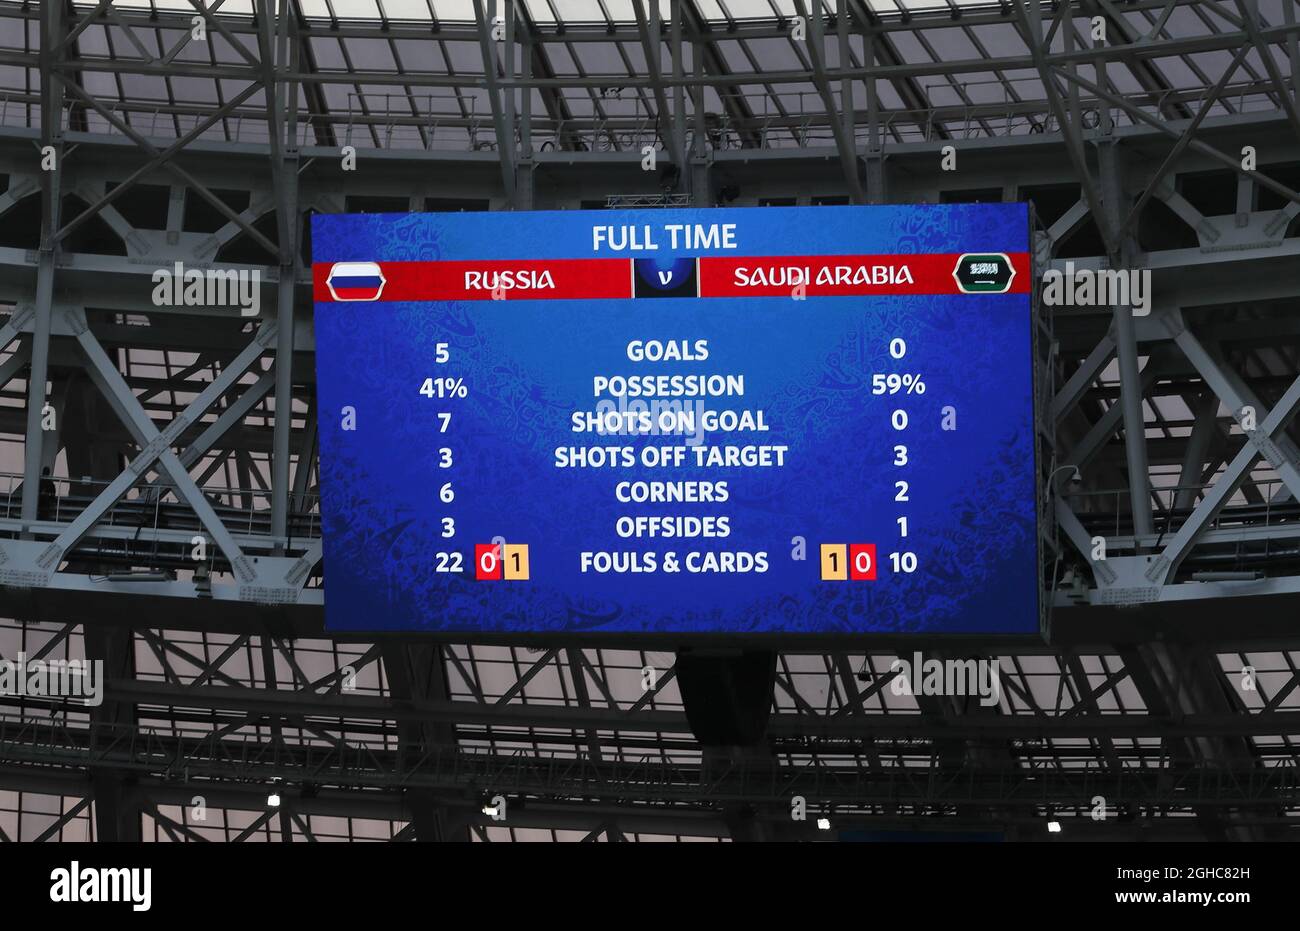 The final scoreboard during the FIFA World Cup 2018 Group A match at the Luzhniki Stadium, Moscow